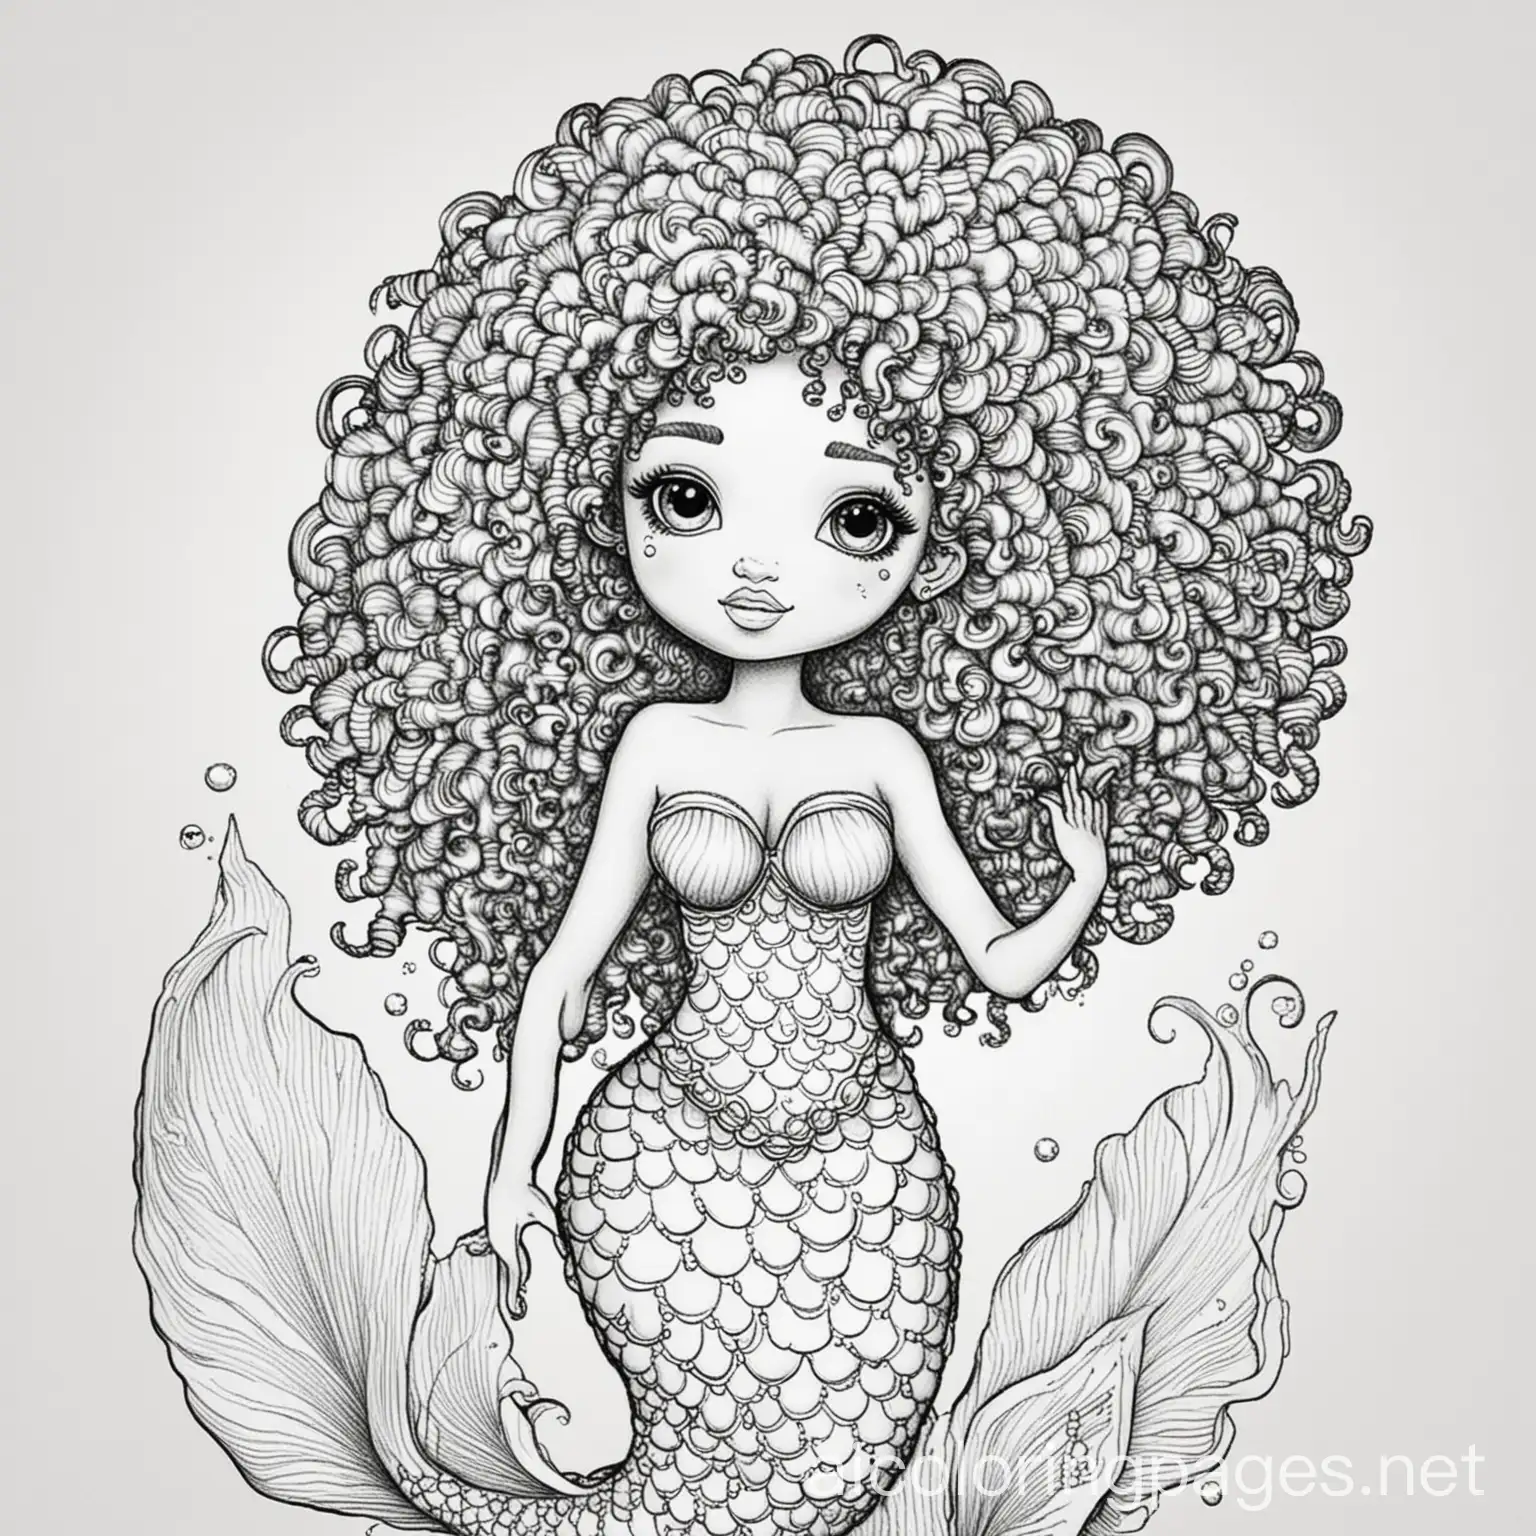 Mermaid-with-Afro-Coloring-Page-Line-Art-for-Simple-Coloring